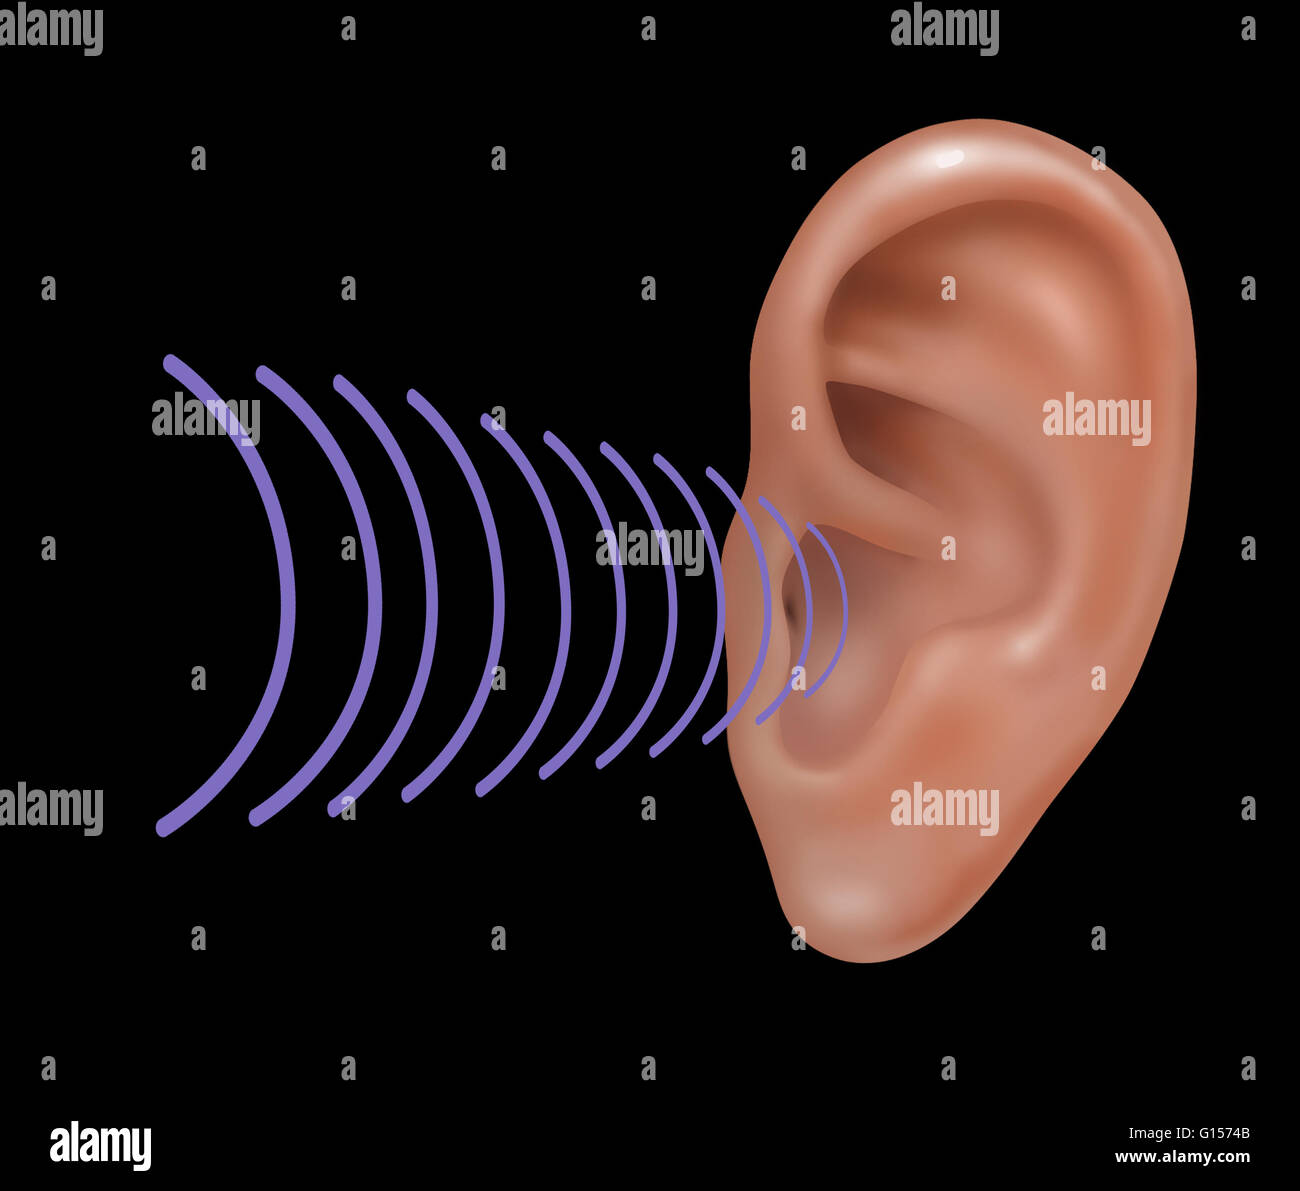 Illustration depicting how sound enters the outer human ear. Stock Photo